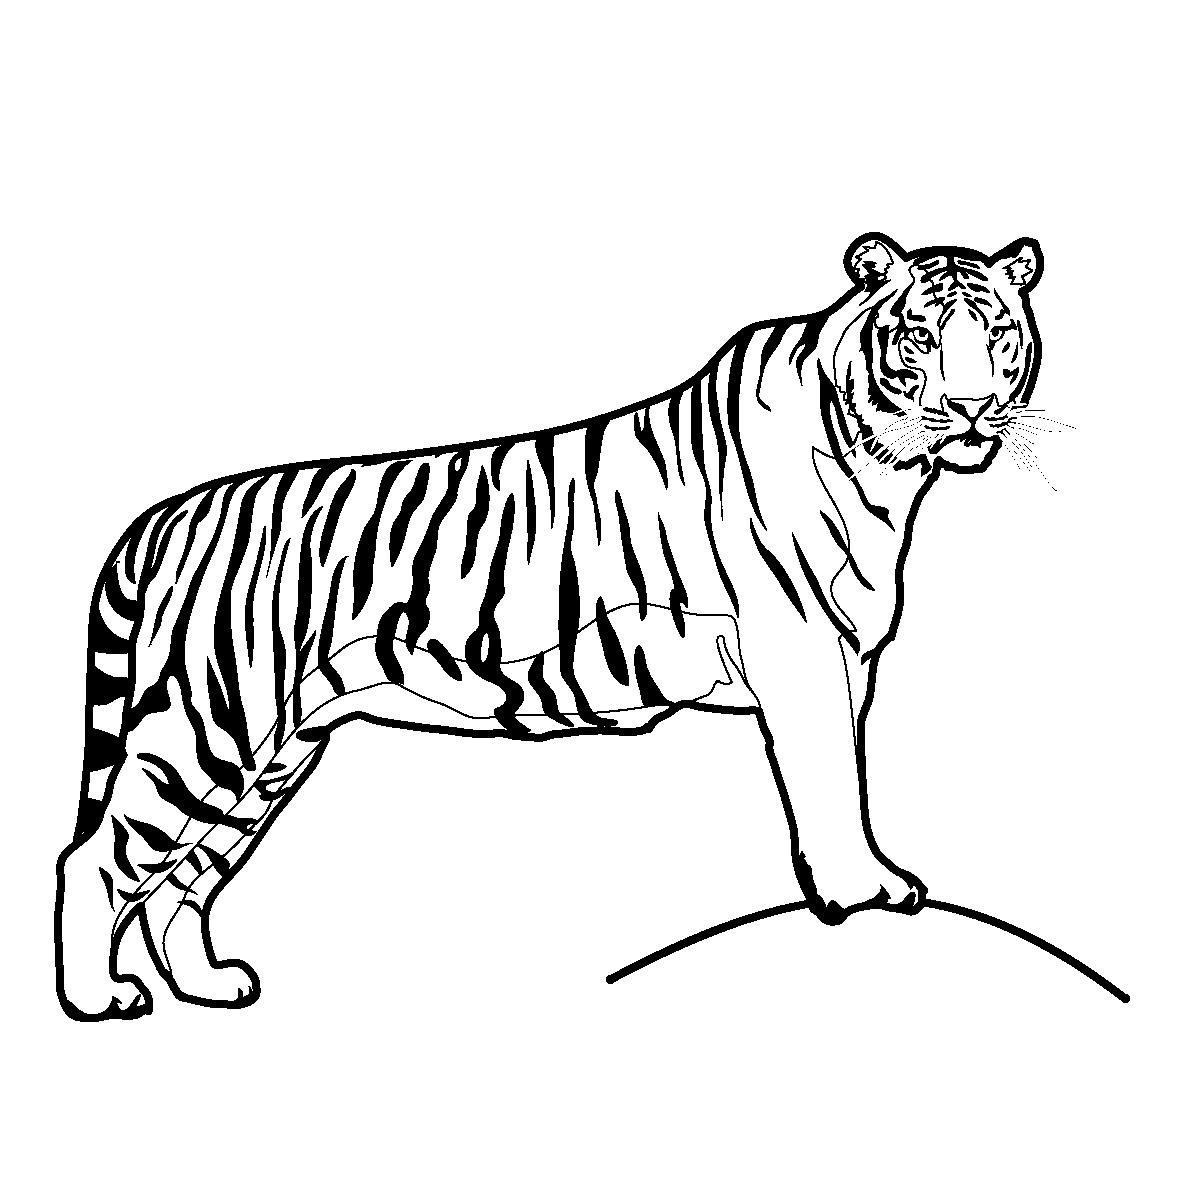 Tiger Clip Art Pictures Black And White | Clipart library - Free